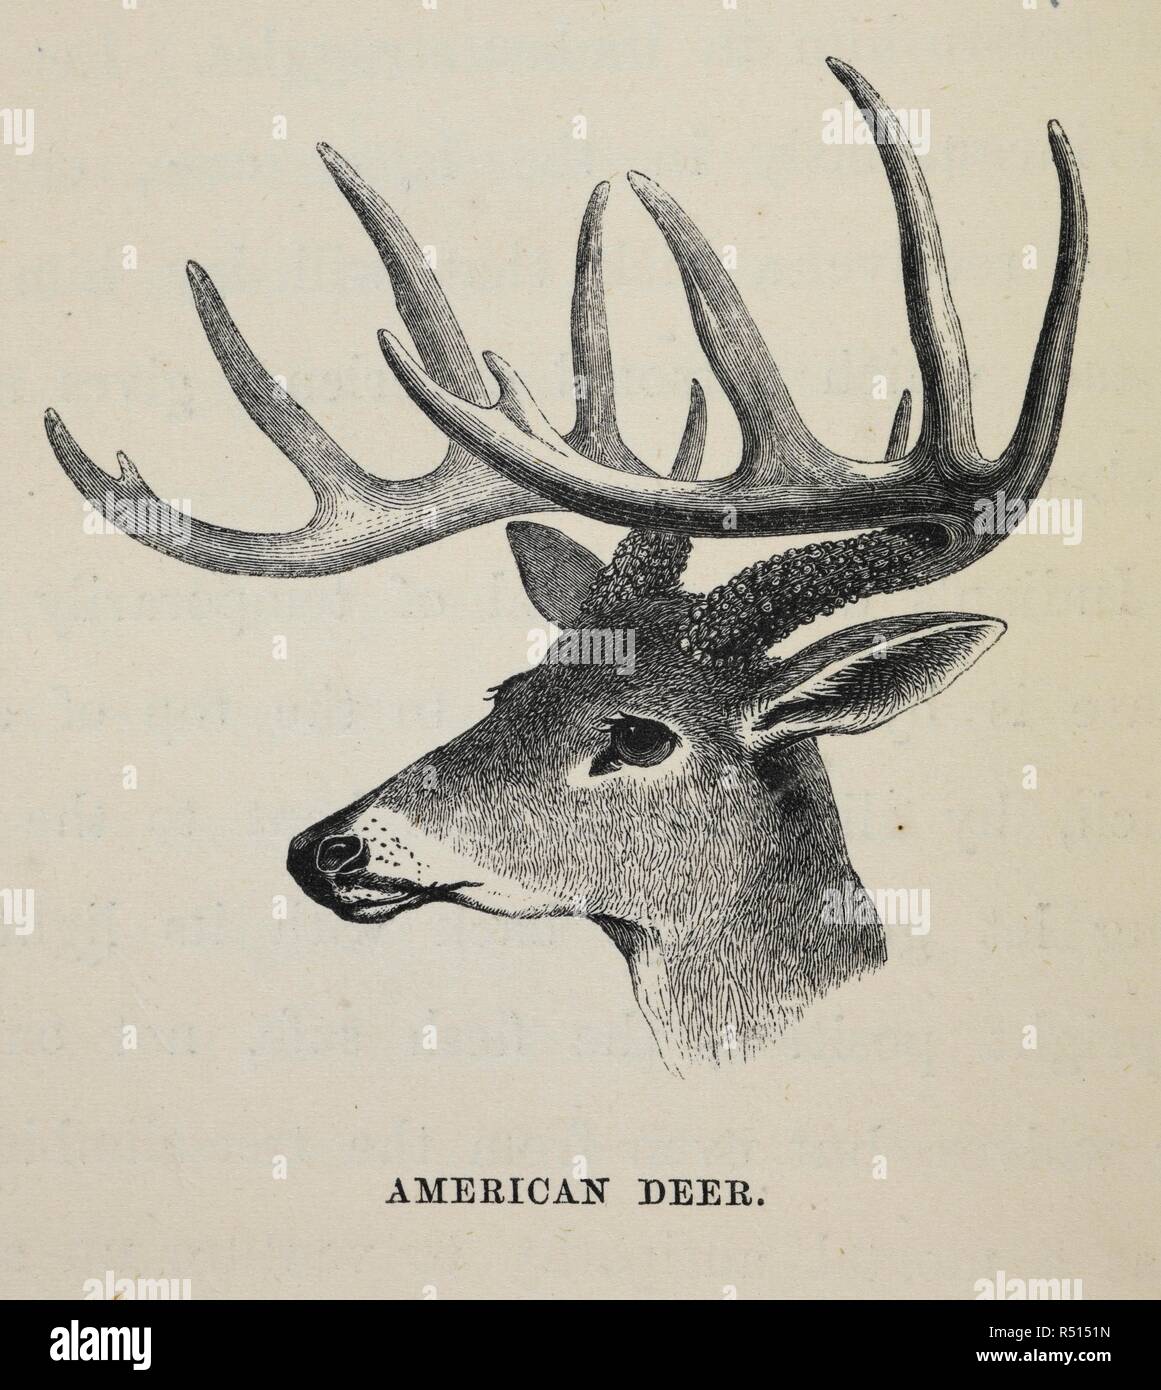 American Deer. The Sportsman and Naturalist in Canada, or notes on the Natural History of the Game, Game Birds, and Fish of that Country ... Illustrated with coloured plates and woodcuts. London, 1866. Source: 10470.i.4. p. 102. Author: ANON. King, Major William Ross. Stock Photo